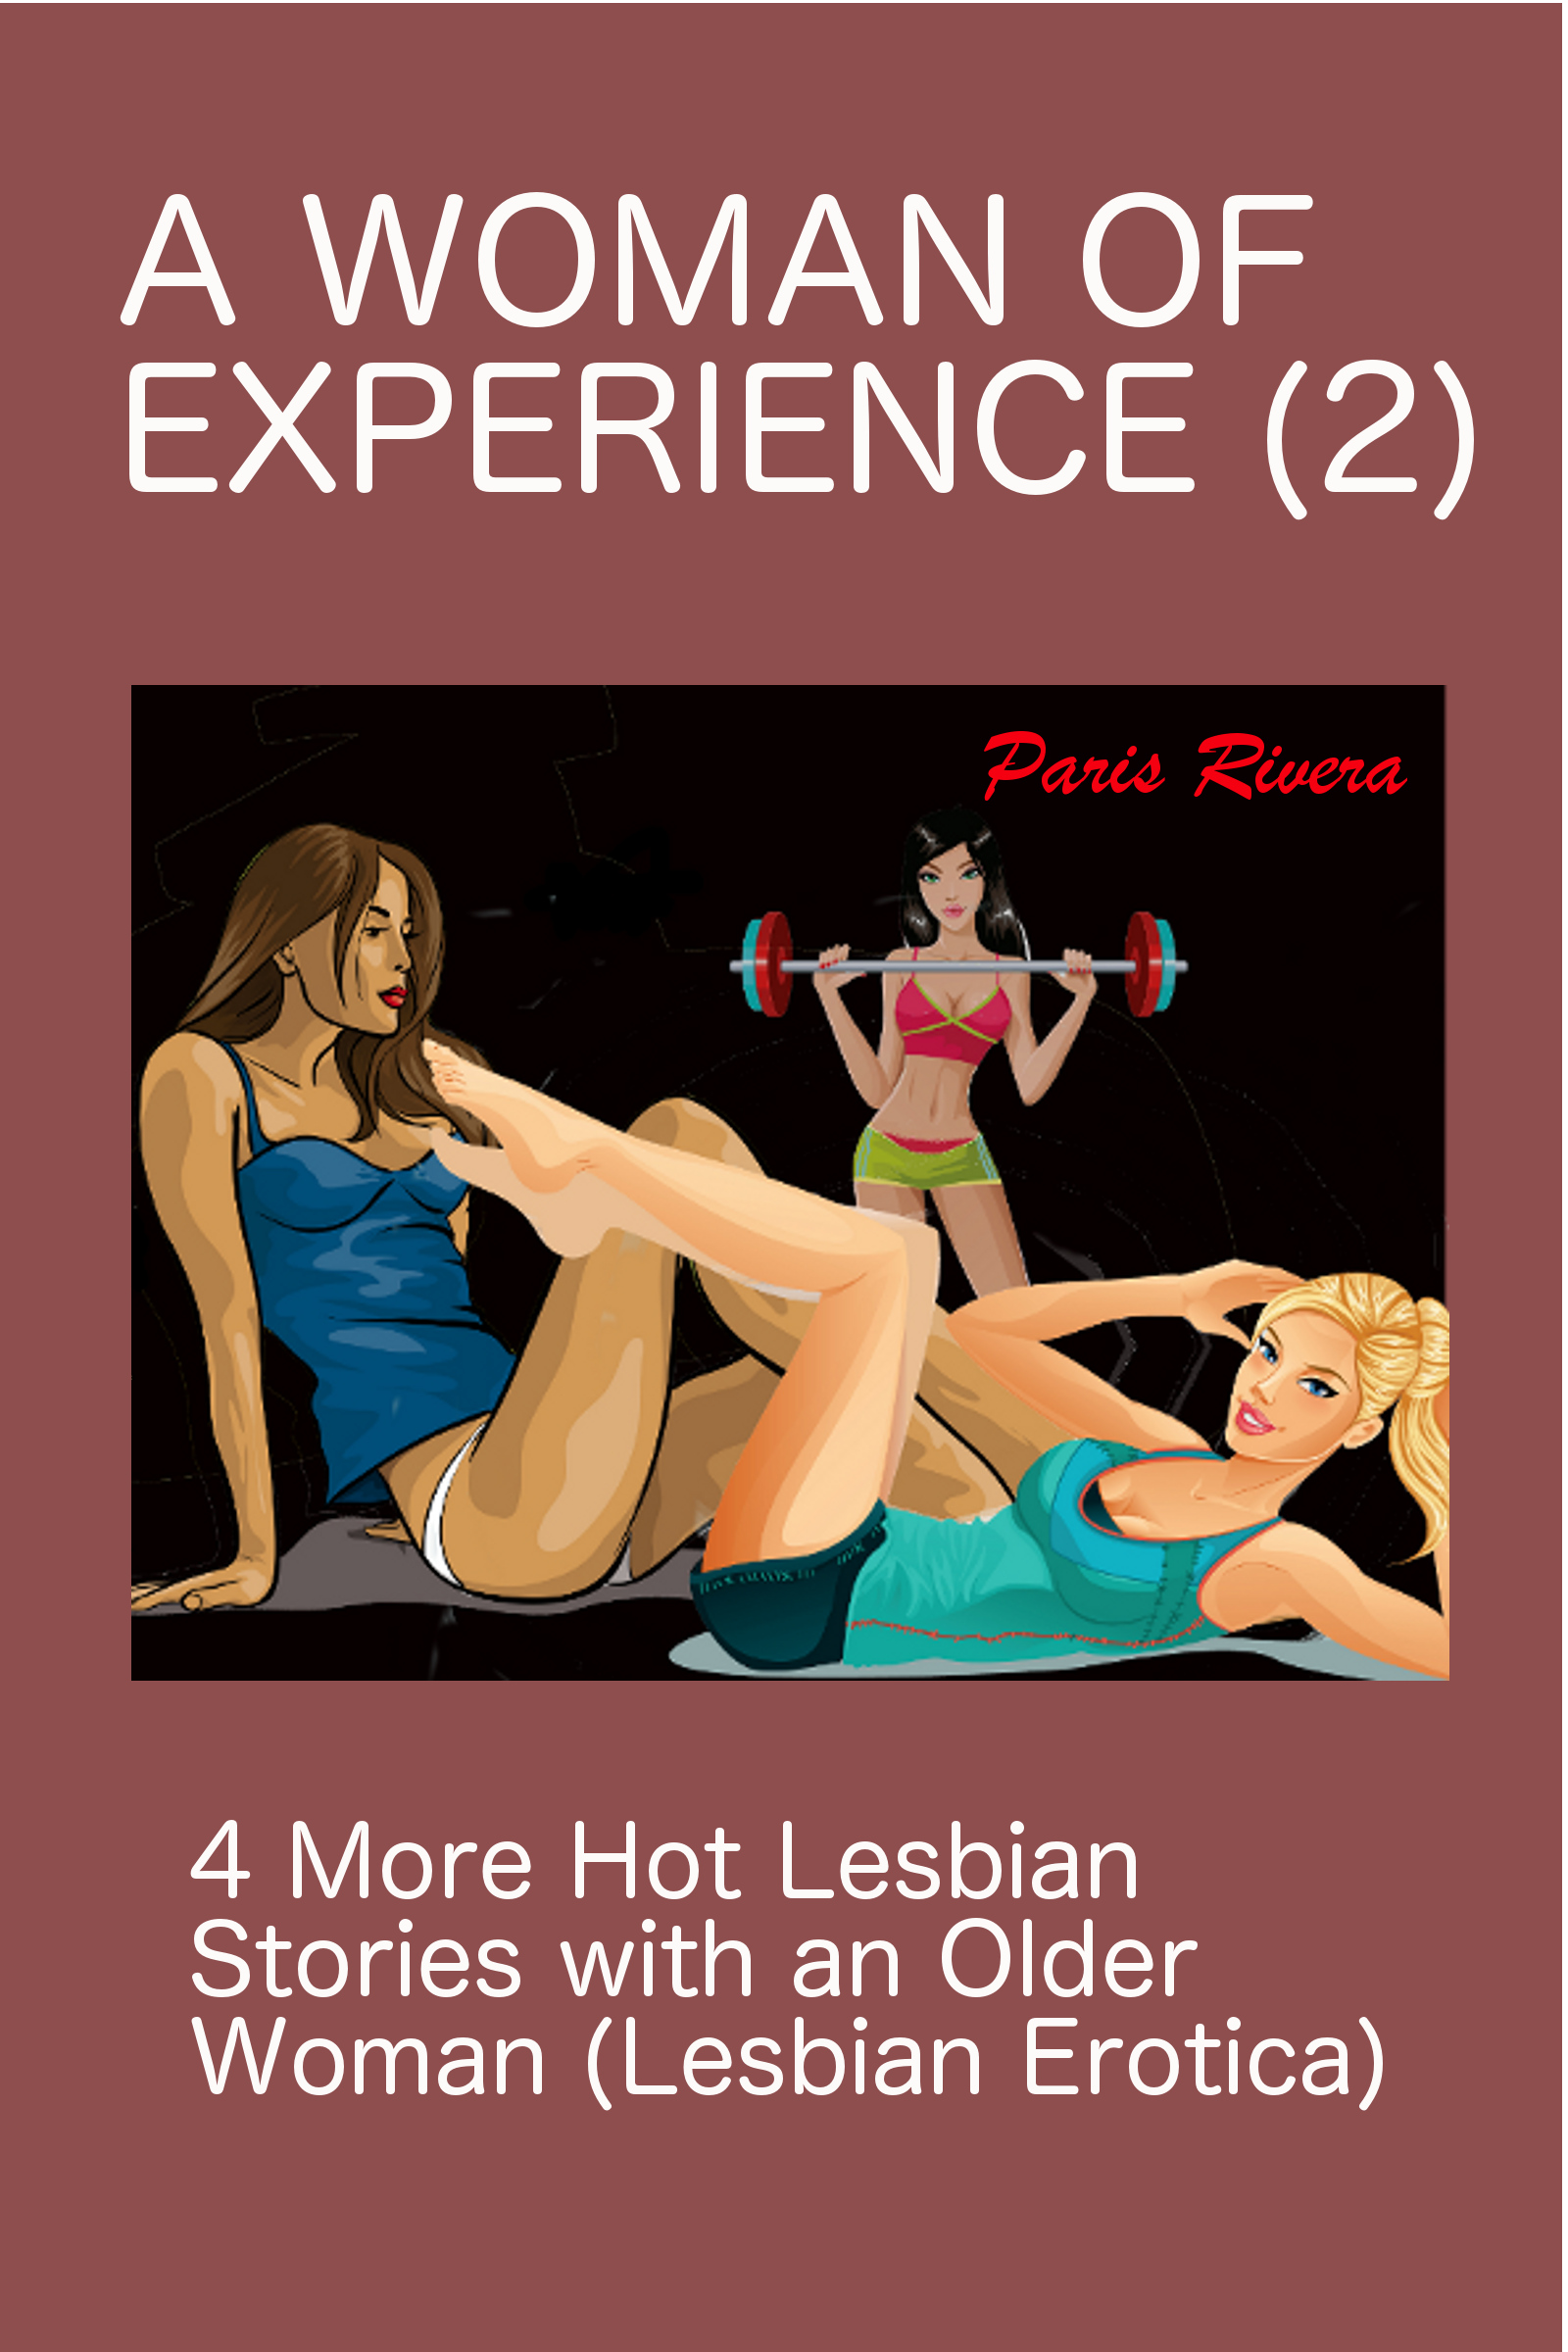 Older Lesbian Erotica - Smashwords â€“ A Woman of Experience (2): 4 More Hot Lesbian Stories with an Older  Woman (Lesbian Erotica) â€“ a book by Paris Rivera